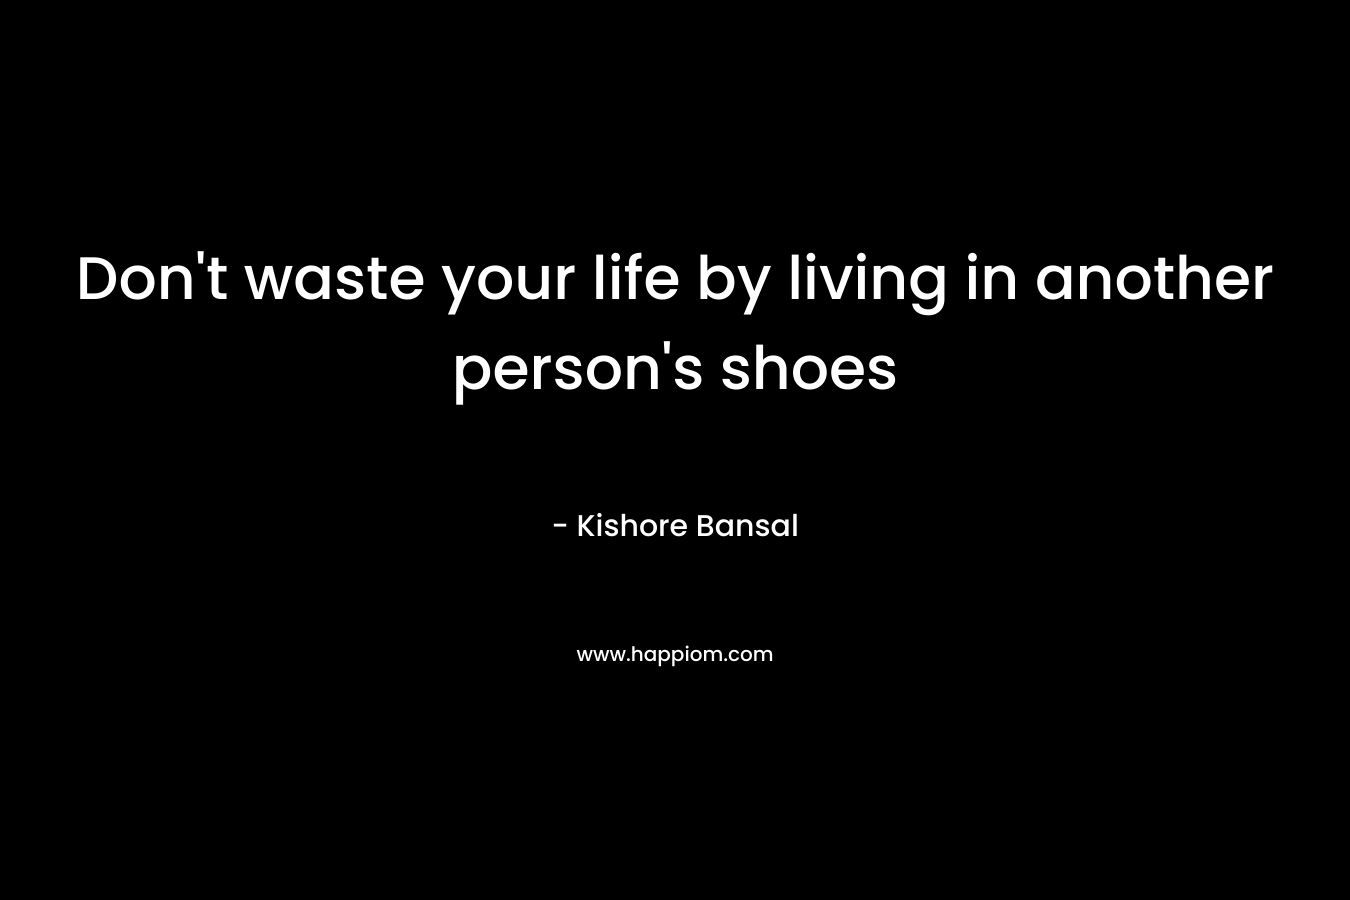 Don’t waste your life by living in another person’s shoes – Kishore Bansal